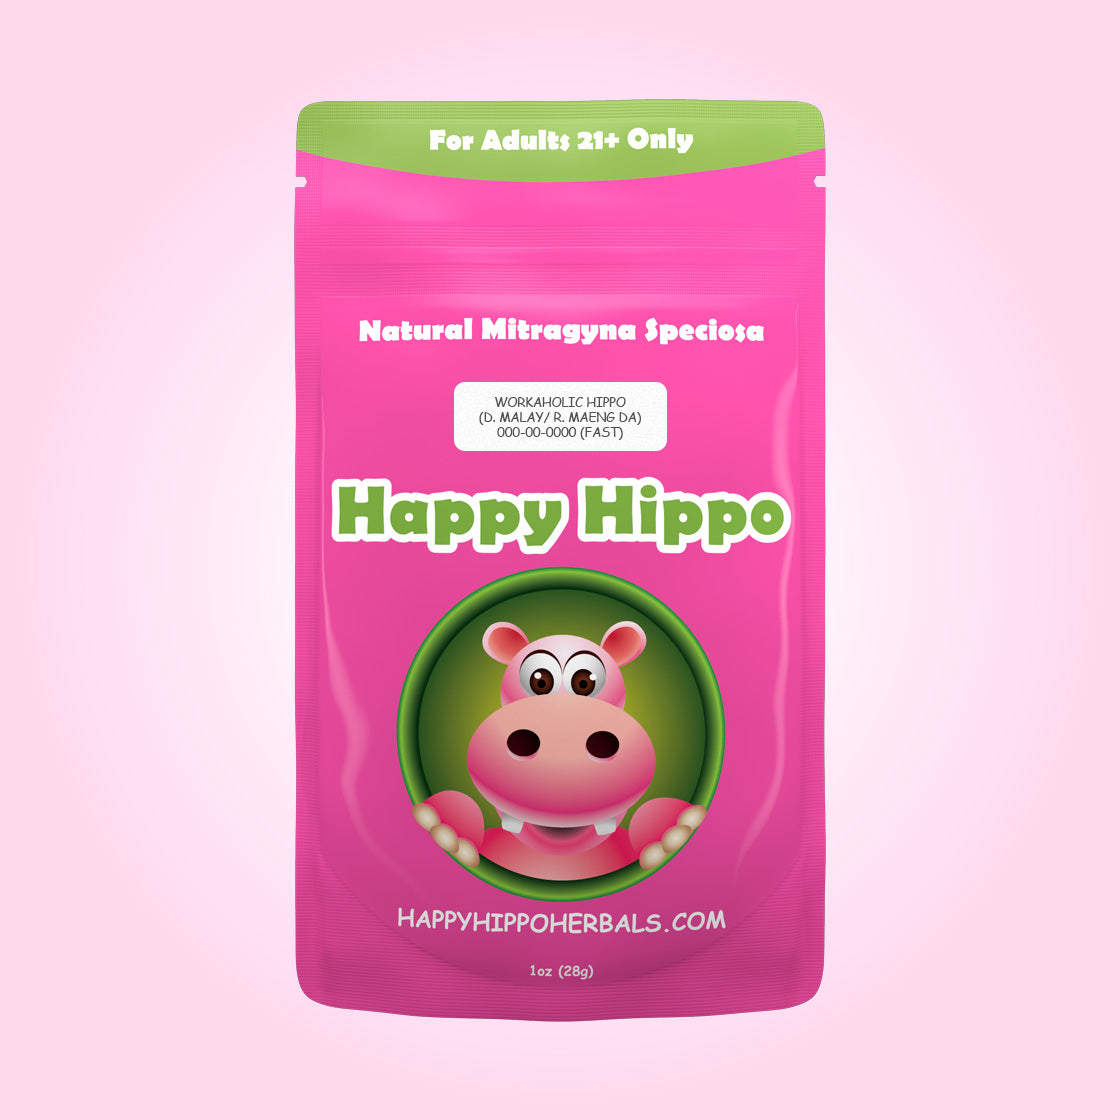 Product Image depicting a 1oz bag of Happy Hippo Blended White Malay and Red Maeng Da Kratom Powder (Mitragyna Speciosa).